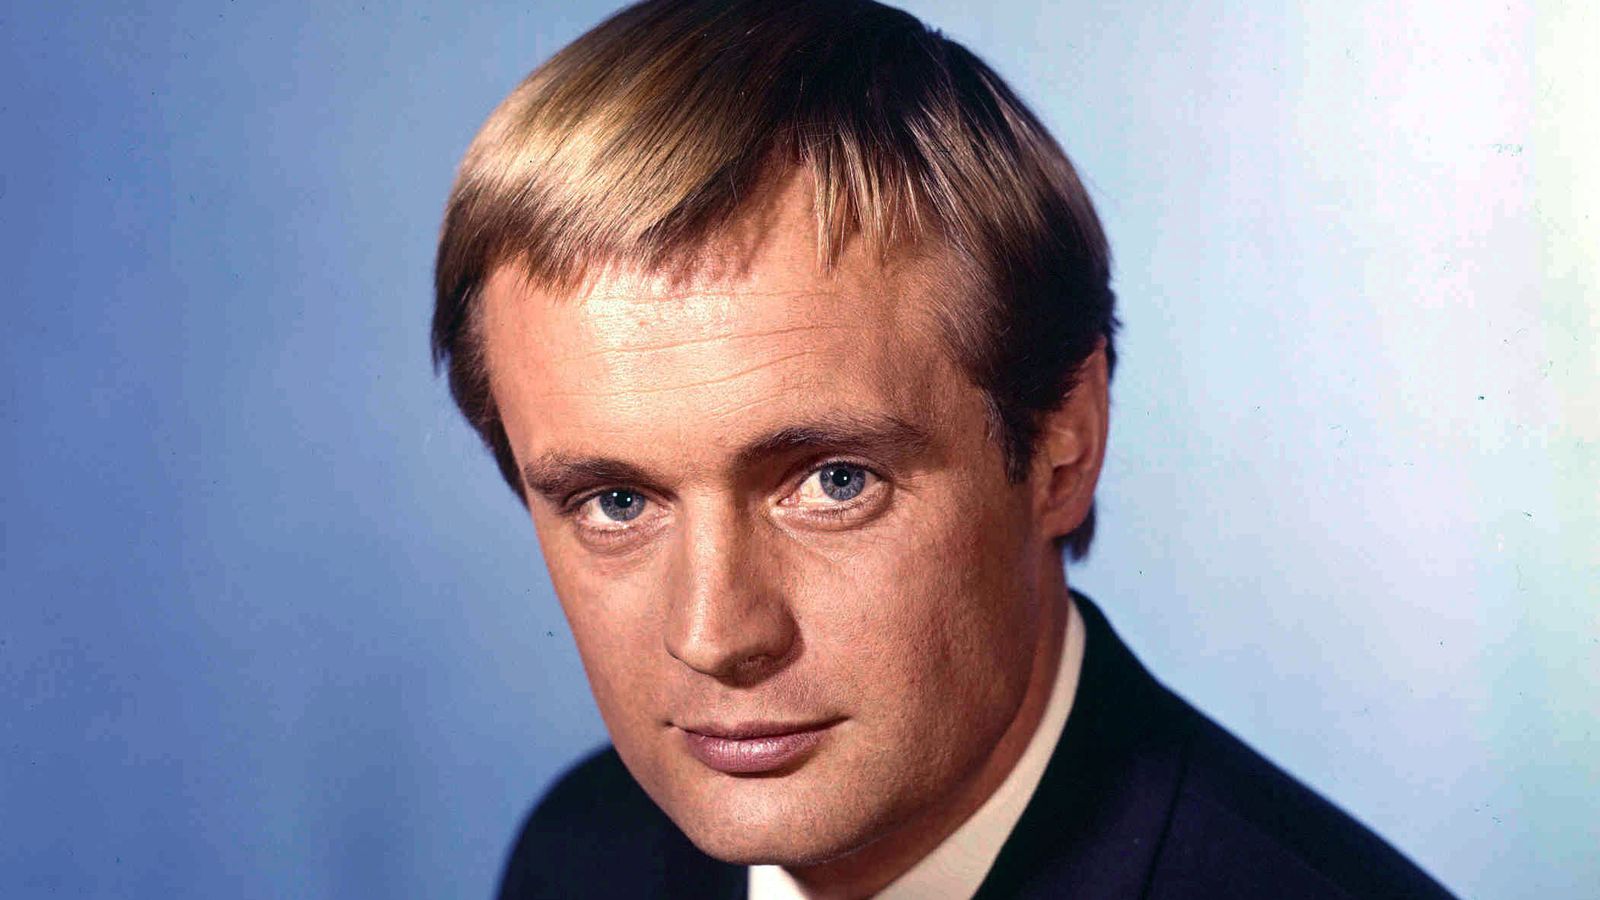 The Man From Uncle Star David Mccallum Dies Ents And Arts News Sky News